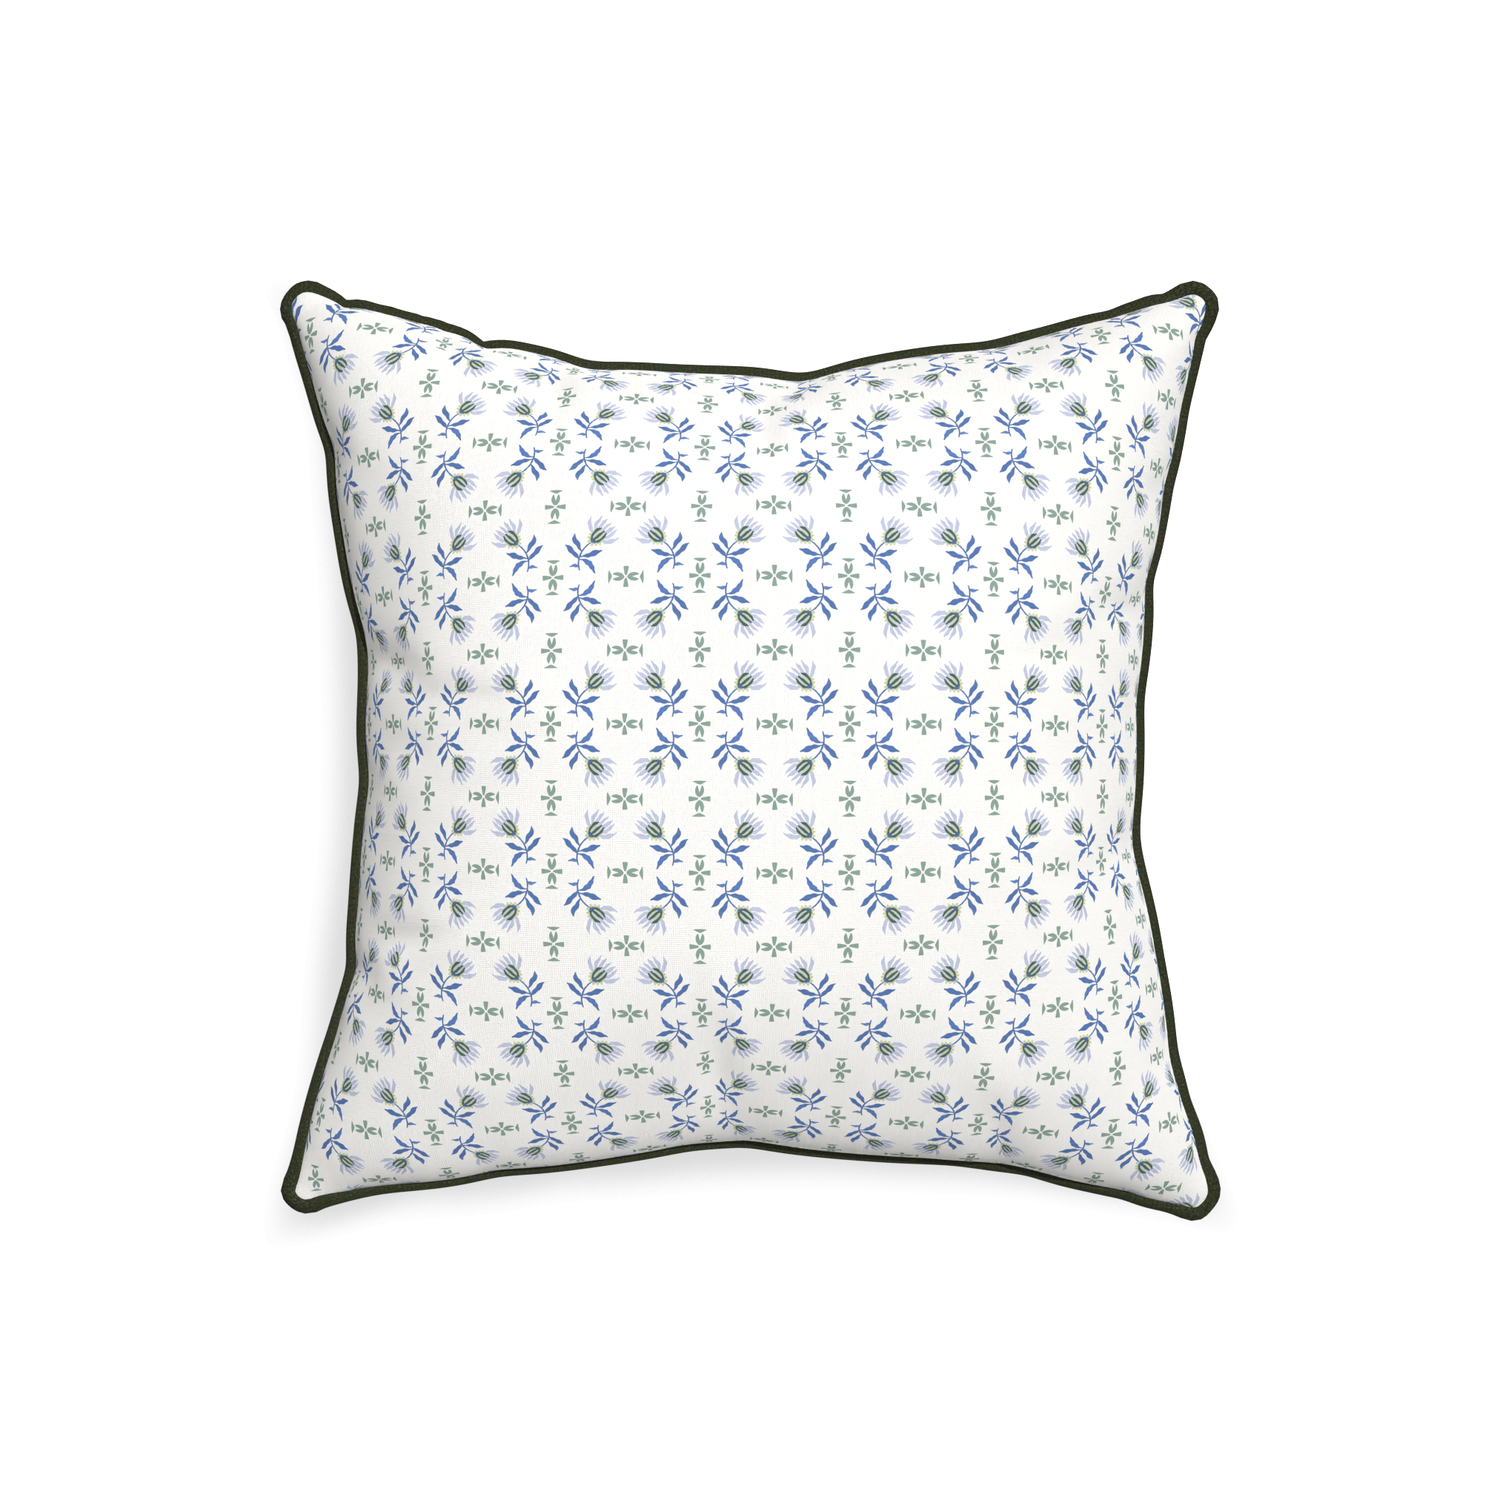 20-square lee custom blue & green floralpillow with f piping on white background